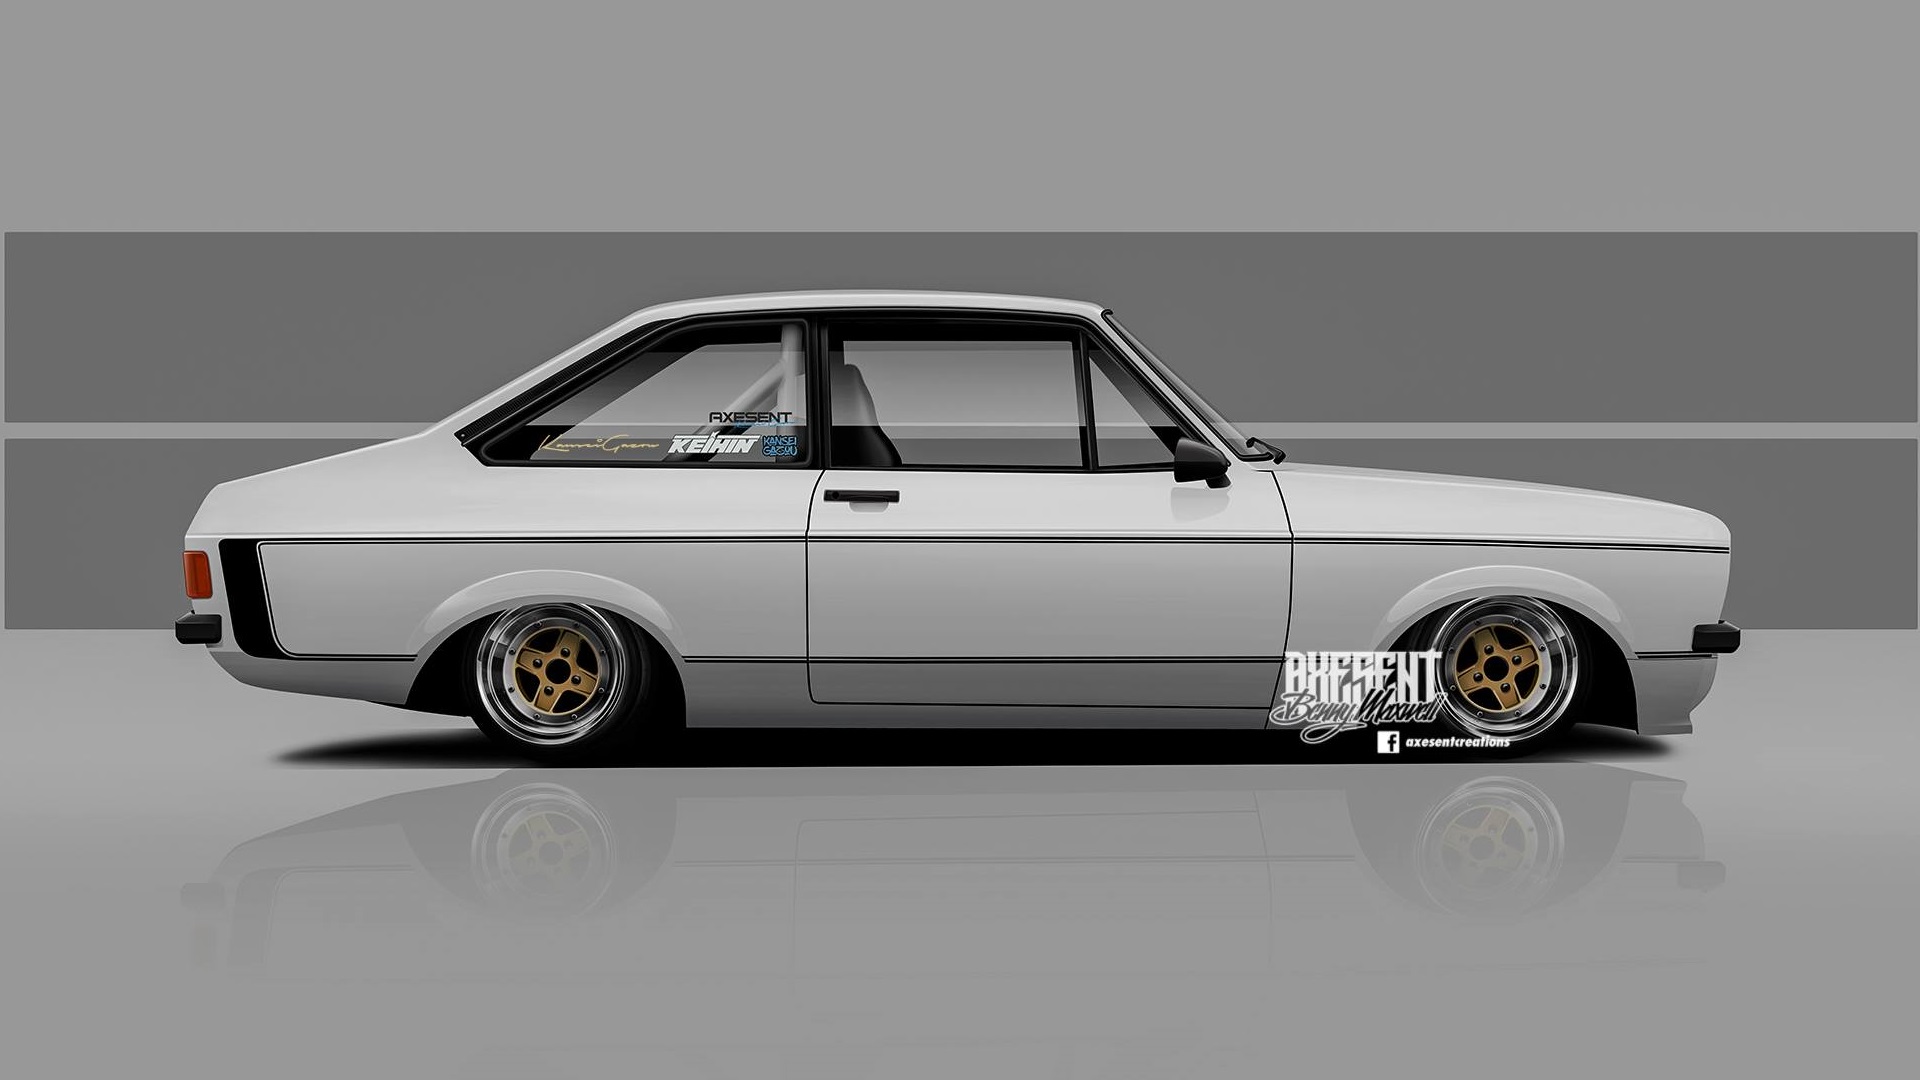 General 1920x1080 Axesent Creations Ford Escort MkII CGI Ford British cars side view white cars